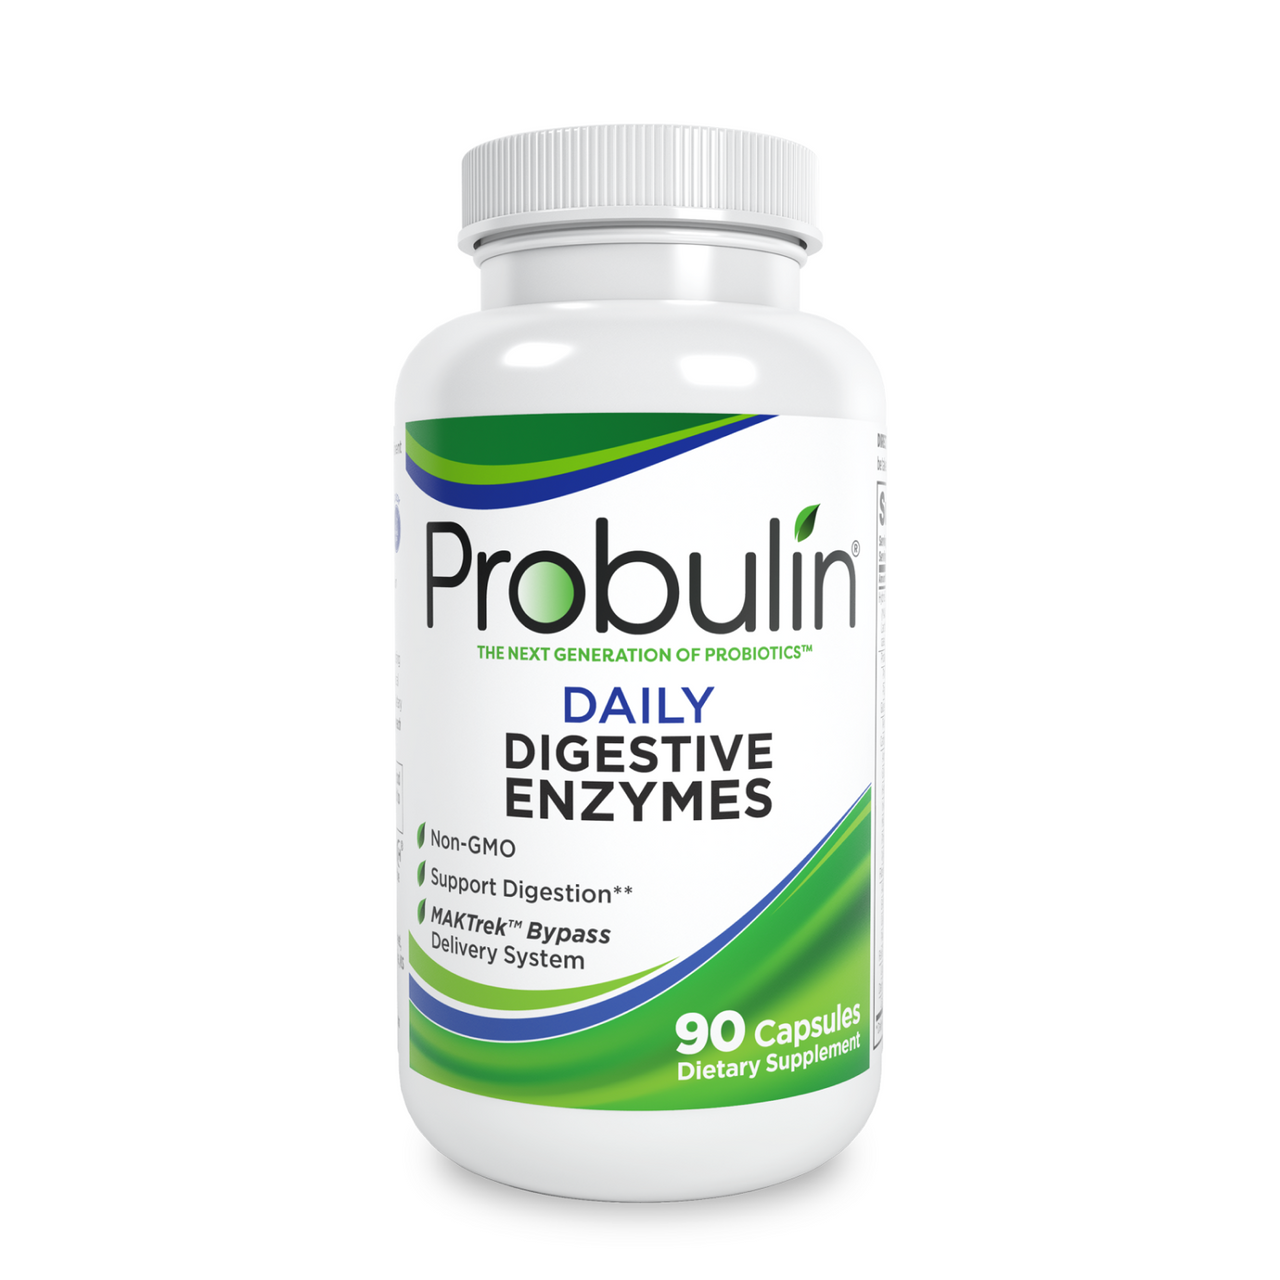 Daily Digestive Enzymes Capsules - 90 Count